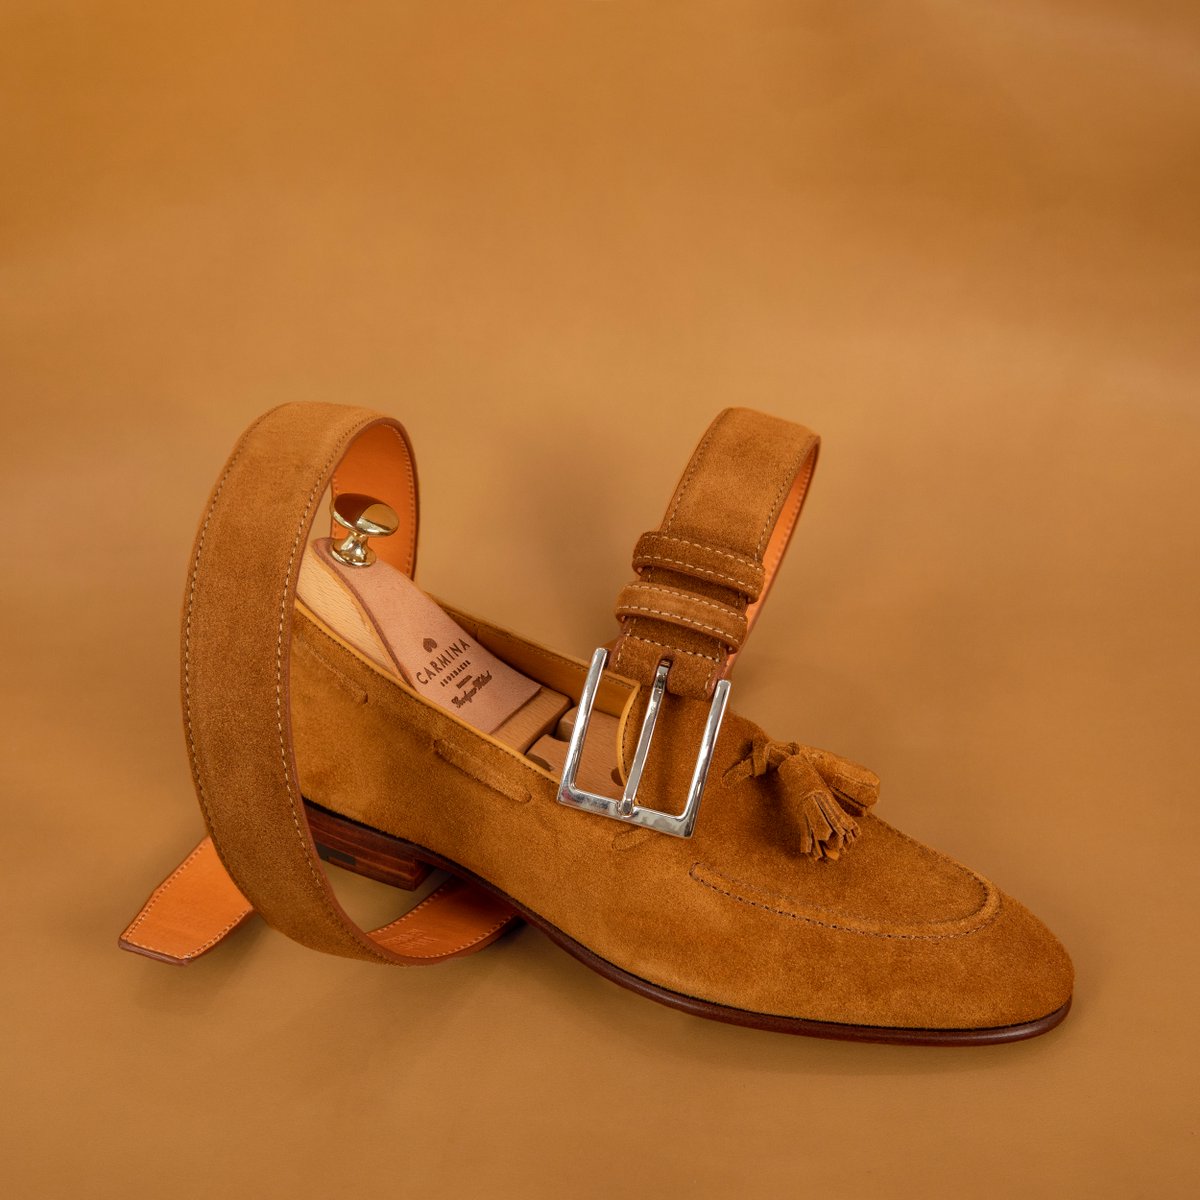 Matching Belt 2024 | Carmina Shoemaker Last days of the promotion. Get a free belt of your choice with every pair of shoes bought. Don’t miss the opportunity to get the best accessory for free. carminashoemaker.com/en #carminashoemaker #handmade #leathershoes